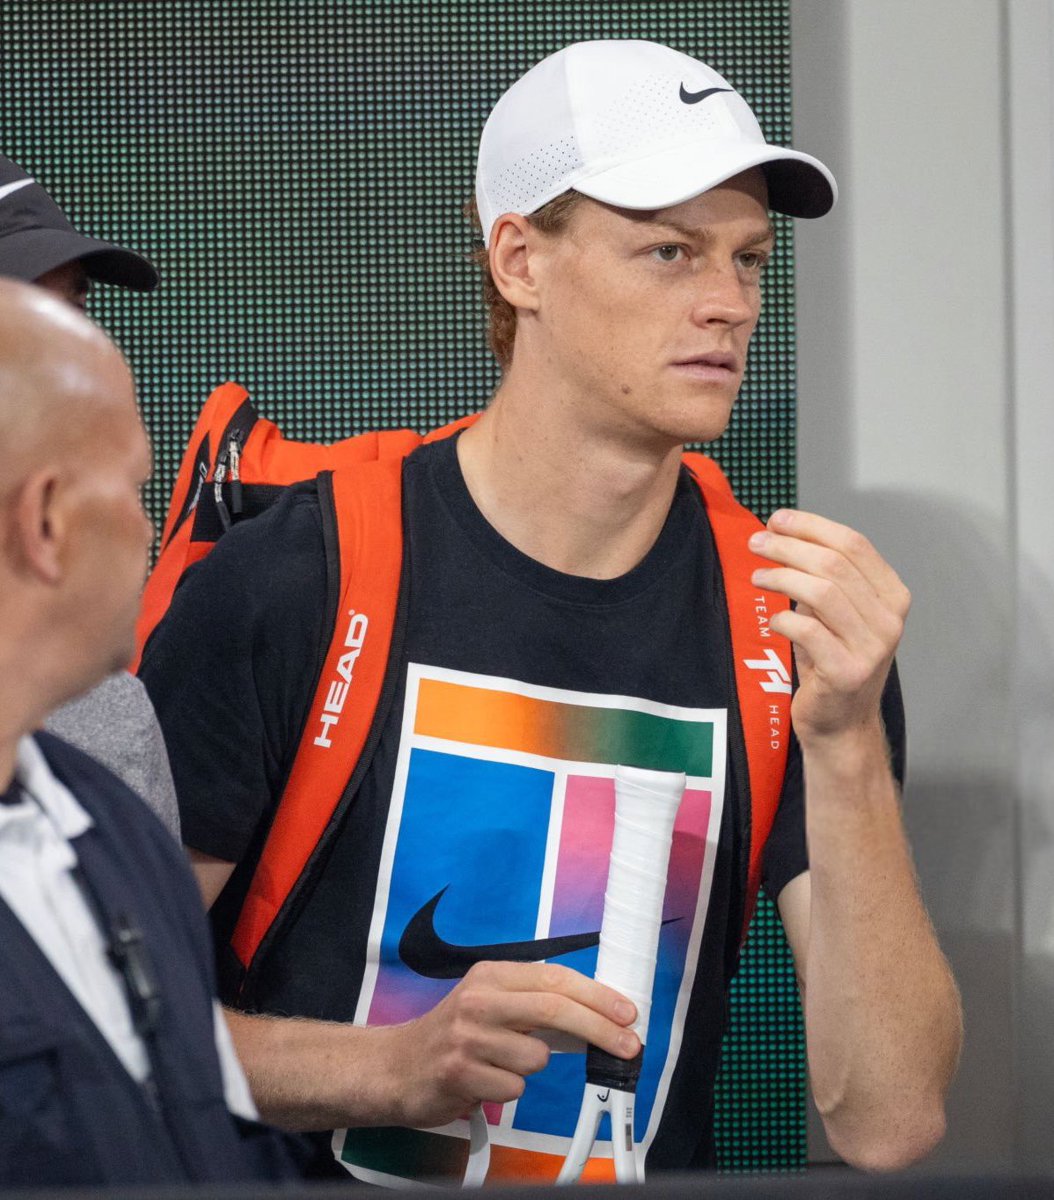 Jannik Sinner says he’s not concerned about his hip anymore: “I’m not concerned about the hip anymore. The physical condition is not 100%, of course, but we can't do magical stuff. I know I can play good tennis, even in the kind of shape I'm right know. I decided to play because